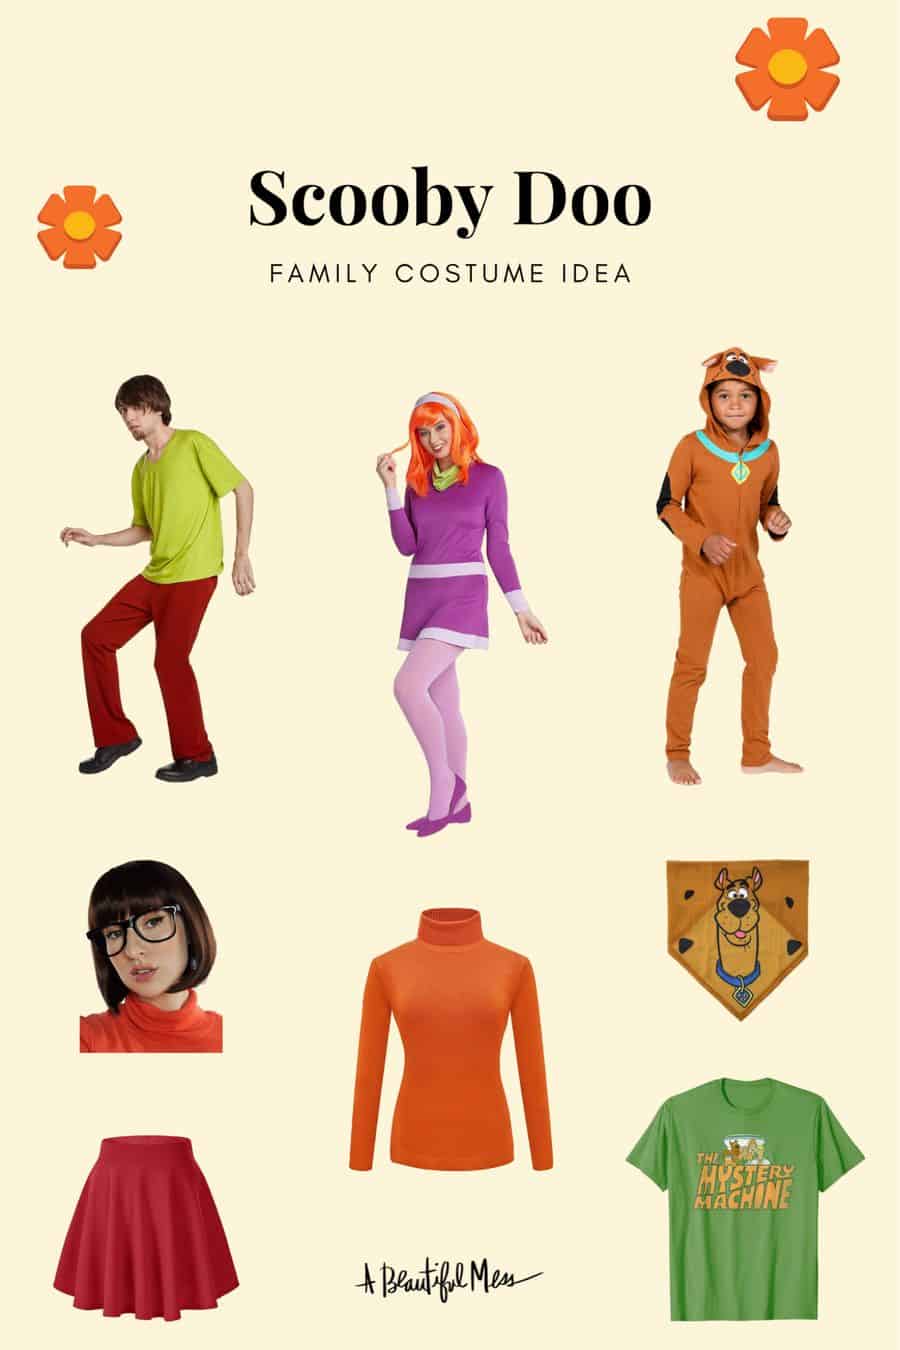 Family halloween costume ideas from Scooby Doo